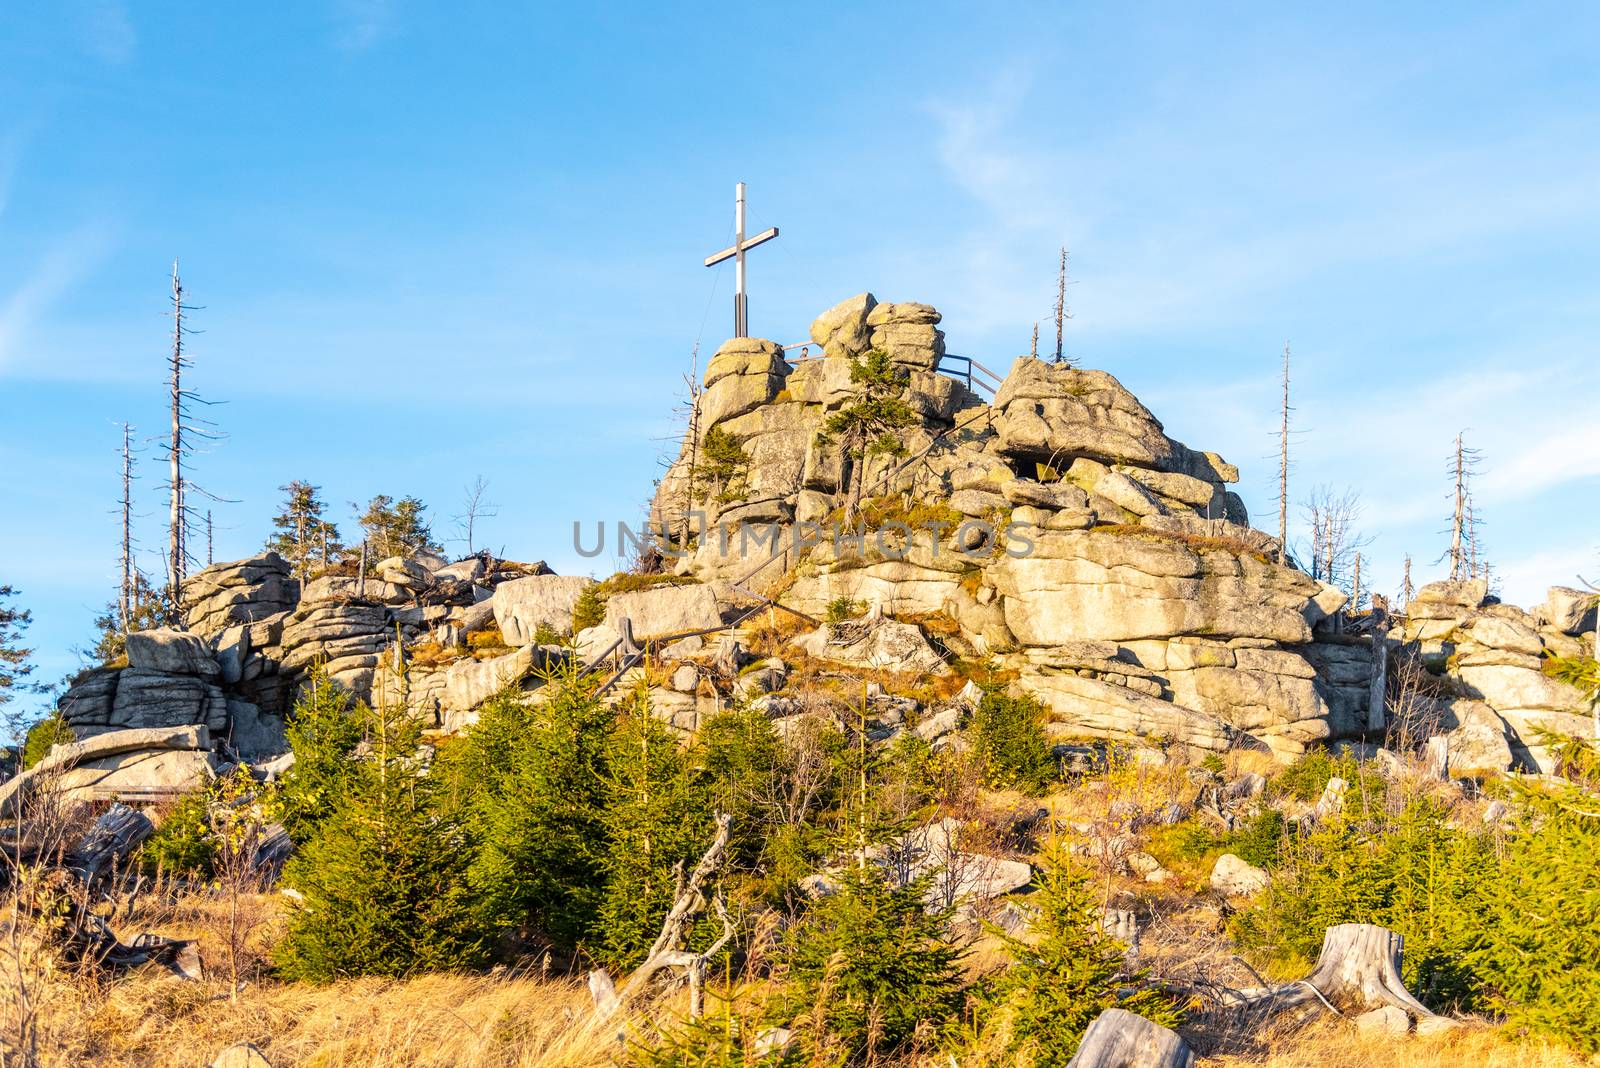 Granite rock formation with wooden cross on the top of Hochstein near Dreisesselberg, Tristolicnik. Border between Bayerische Wald in Germany and Sumava National Park in Czech Republic.